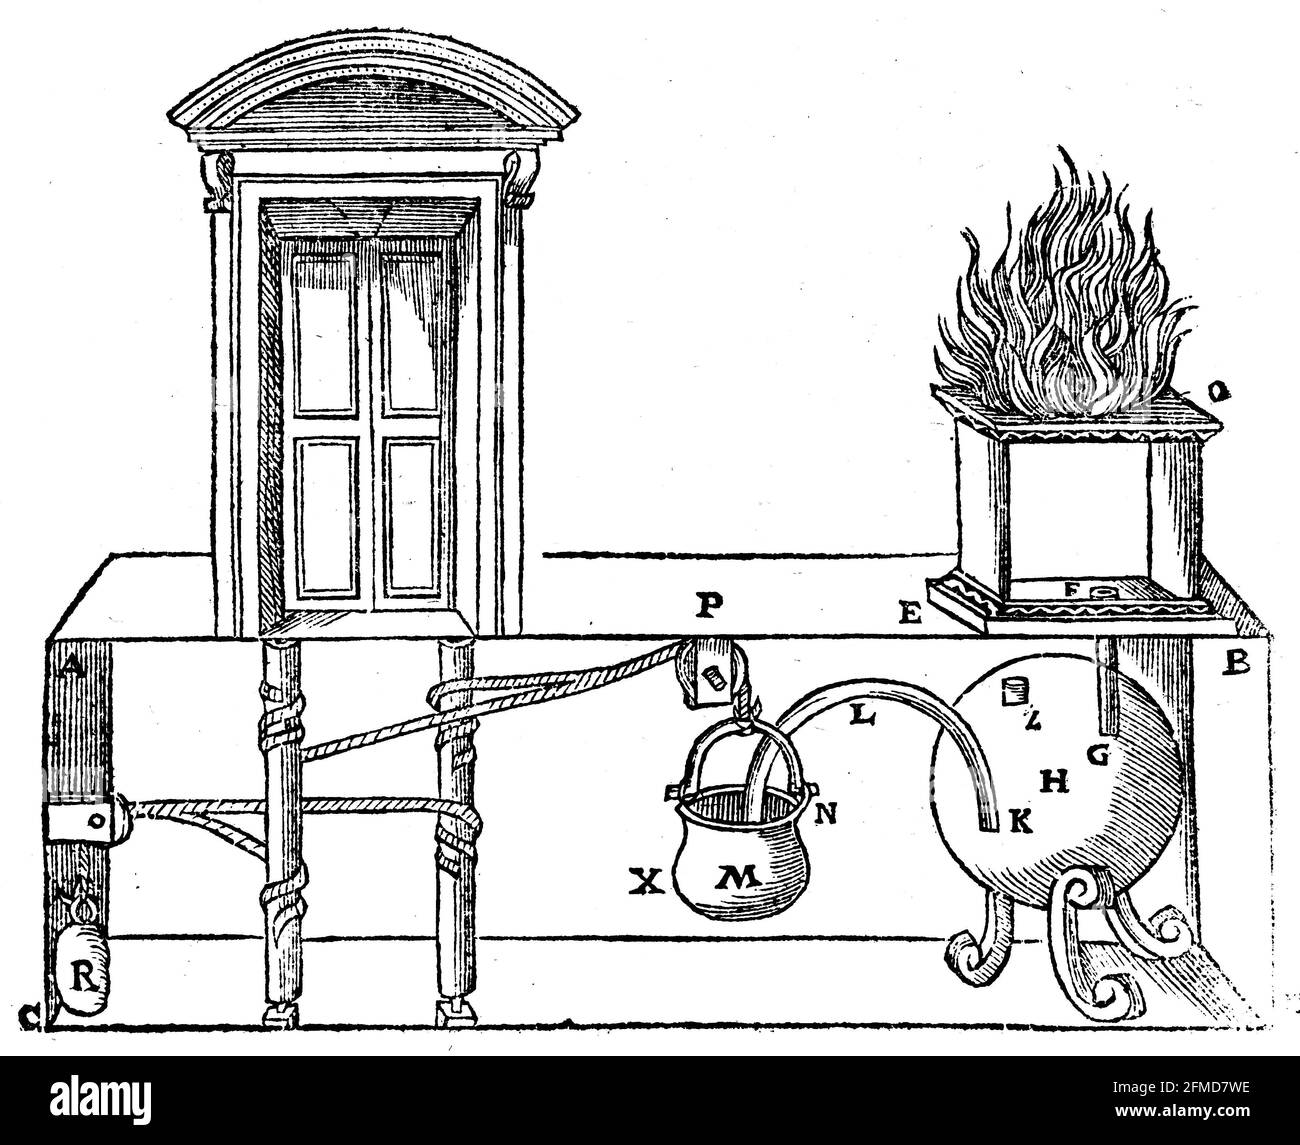 Hero of Alexandria. Illustration of a steam-driven mechanical apparatus for opening doors, designed by the Greco-Egyptian mathematician Hero of Alexandria (c. 10 AD-c. 70 AD) Stock Photo